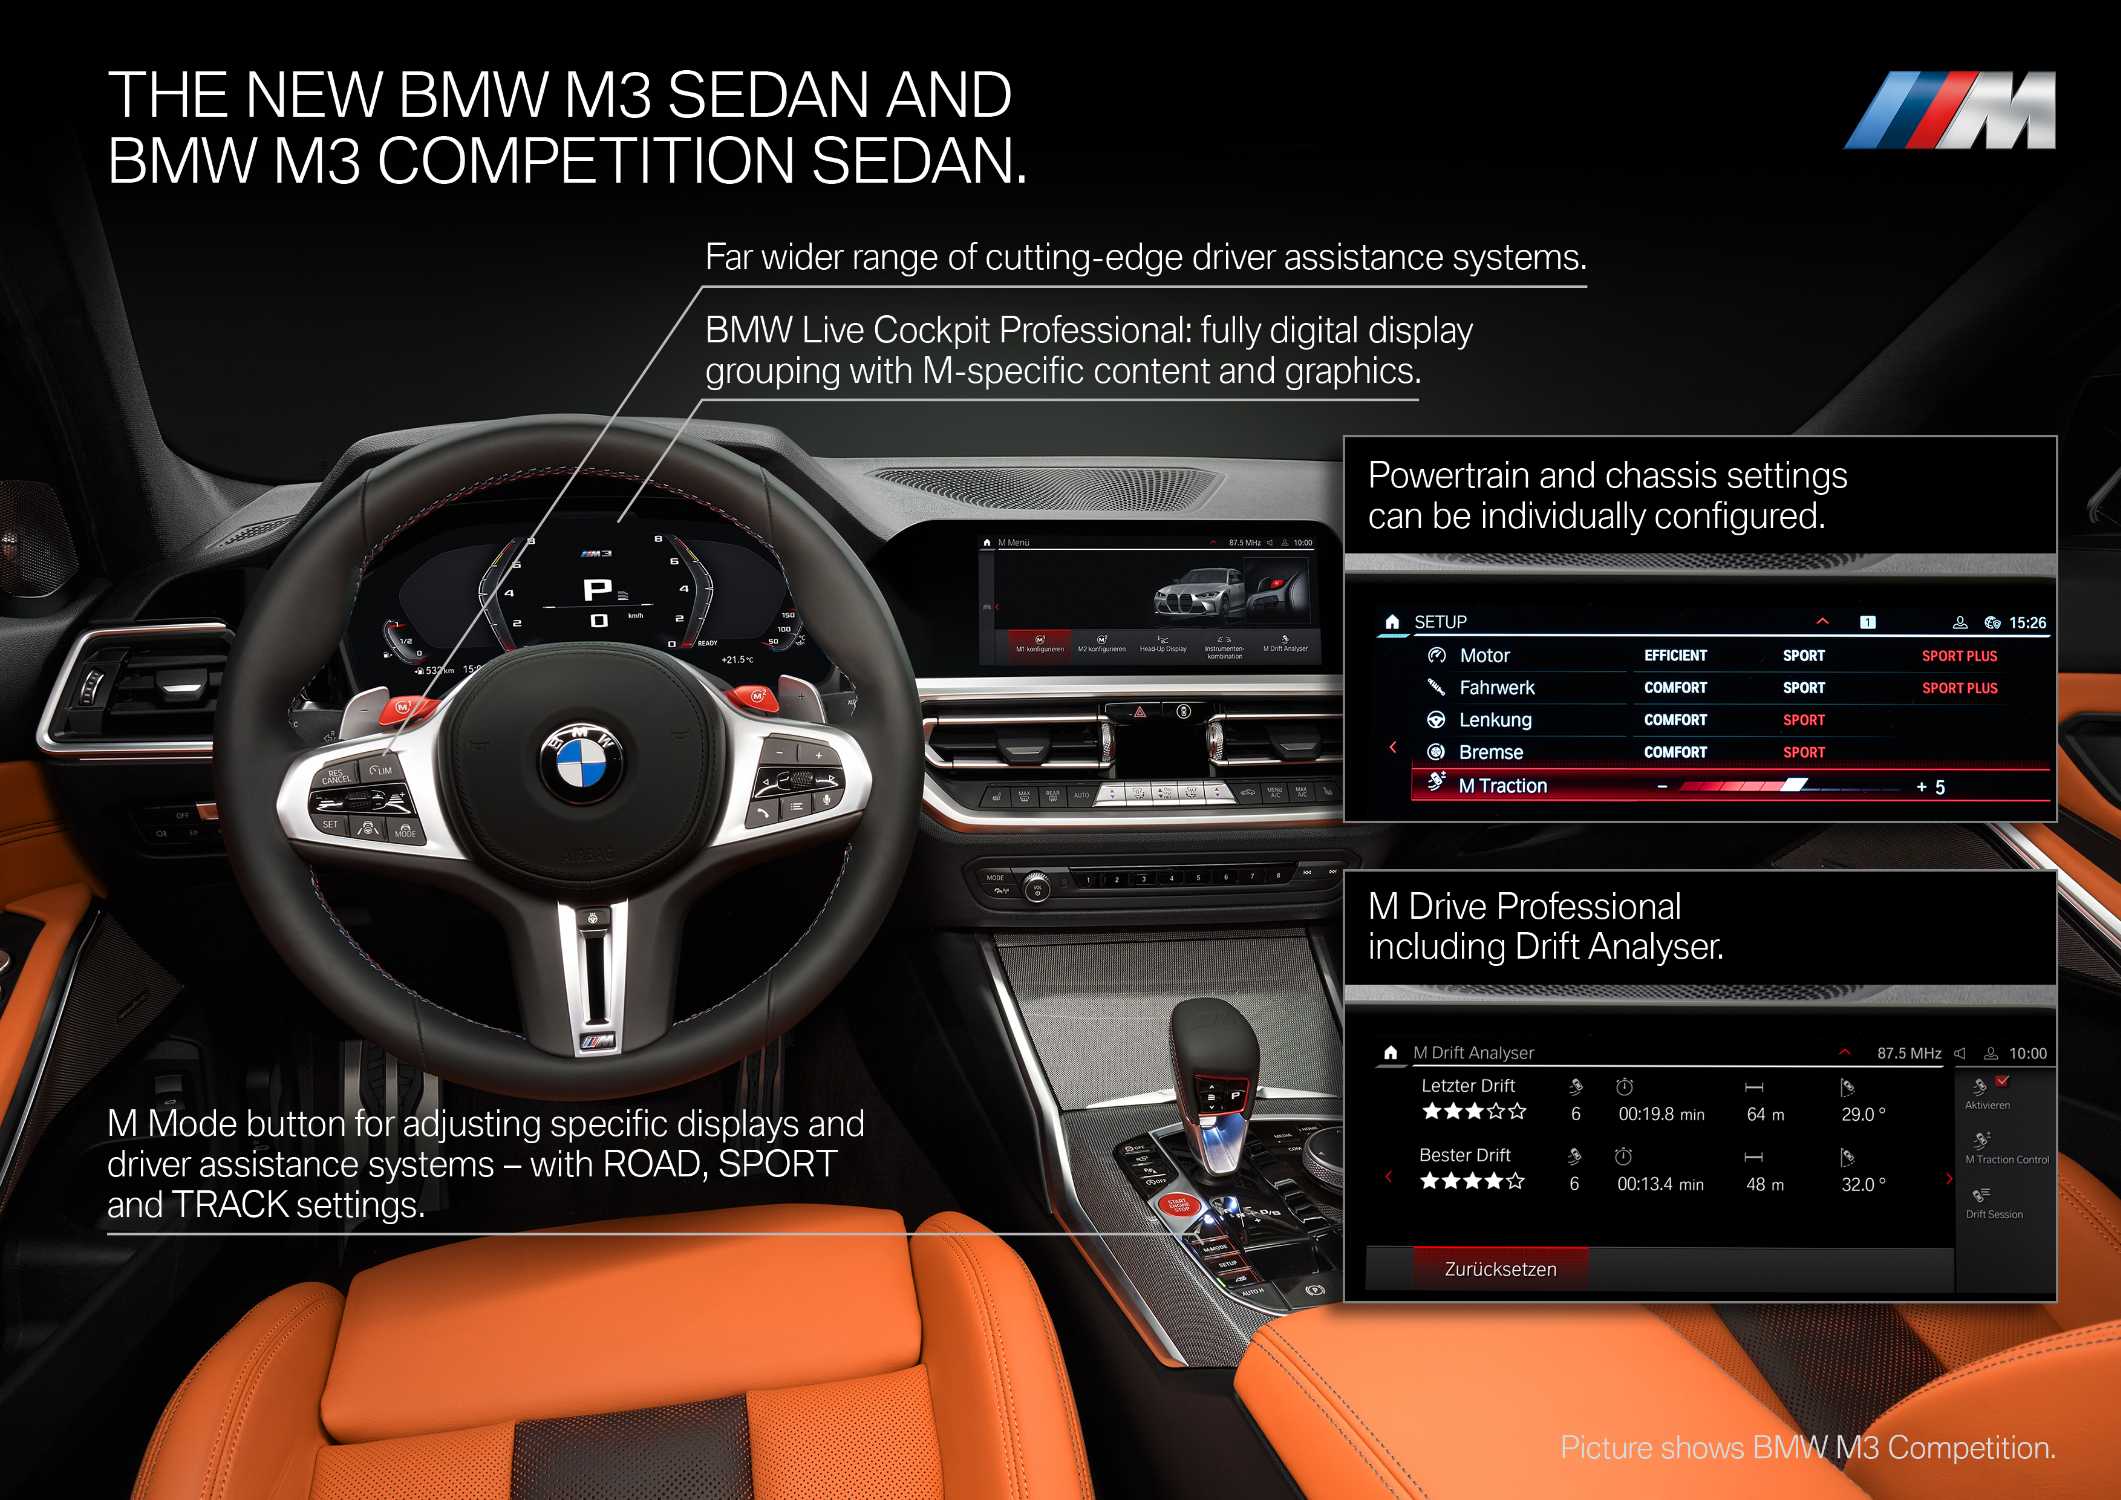 The new BMW M3 Competition Sedan (09/2020).